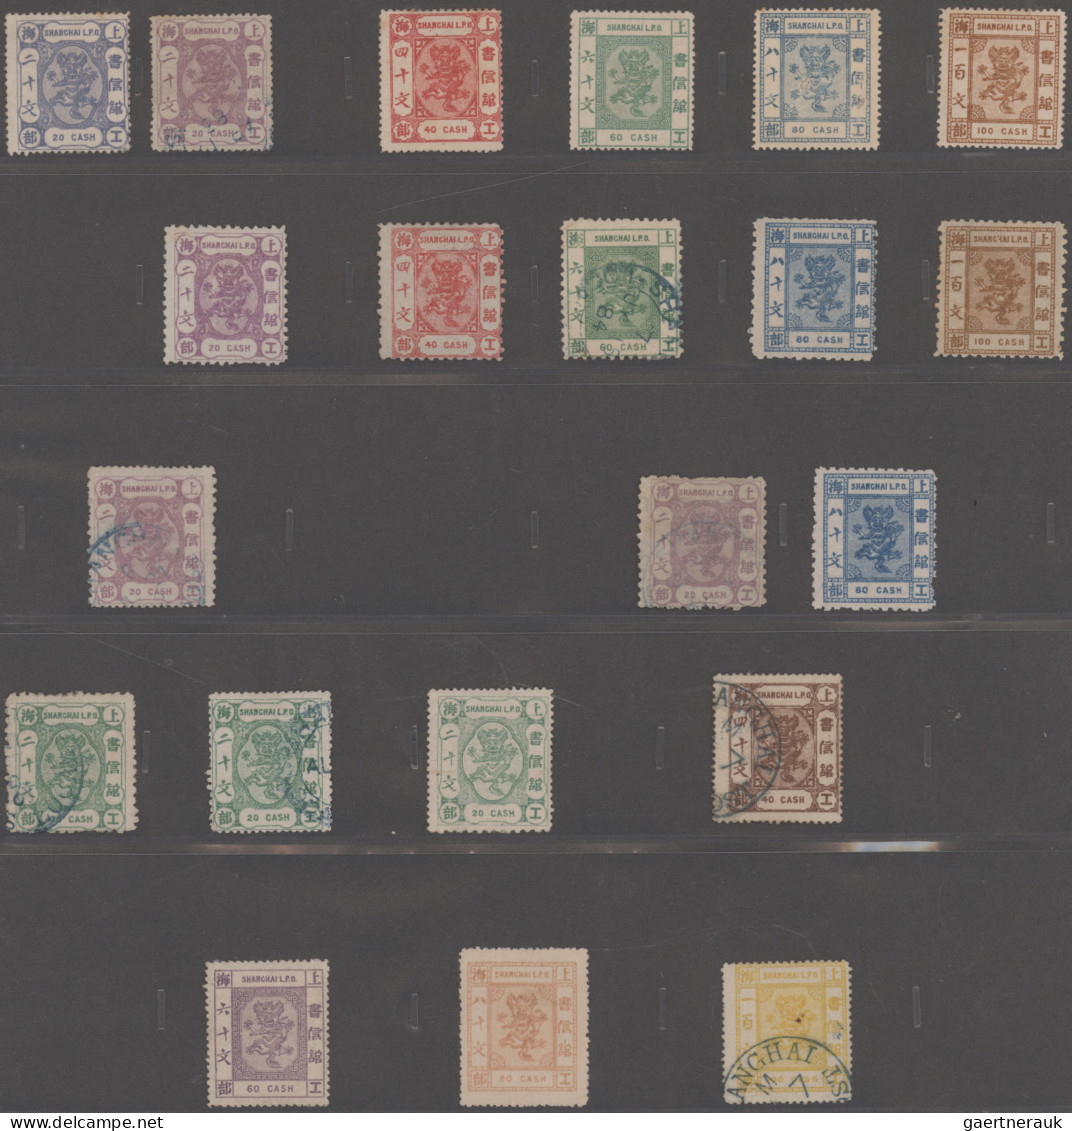 China - Shanghai: 1865/1897, comprehensive collection of Shanghai Local Post in